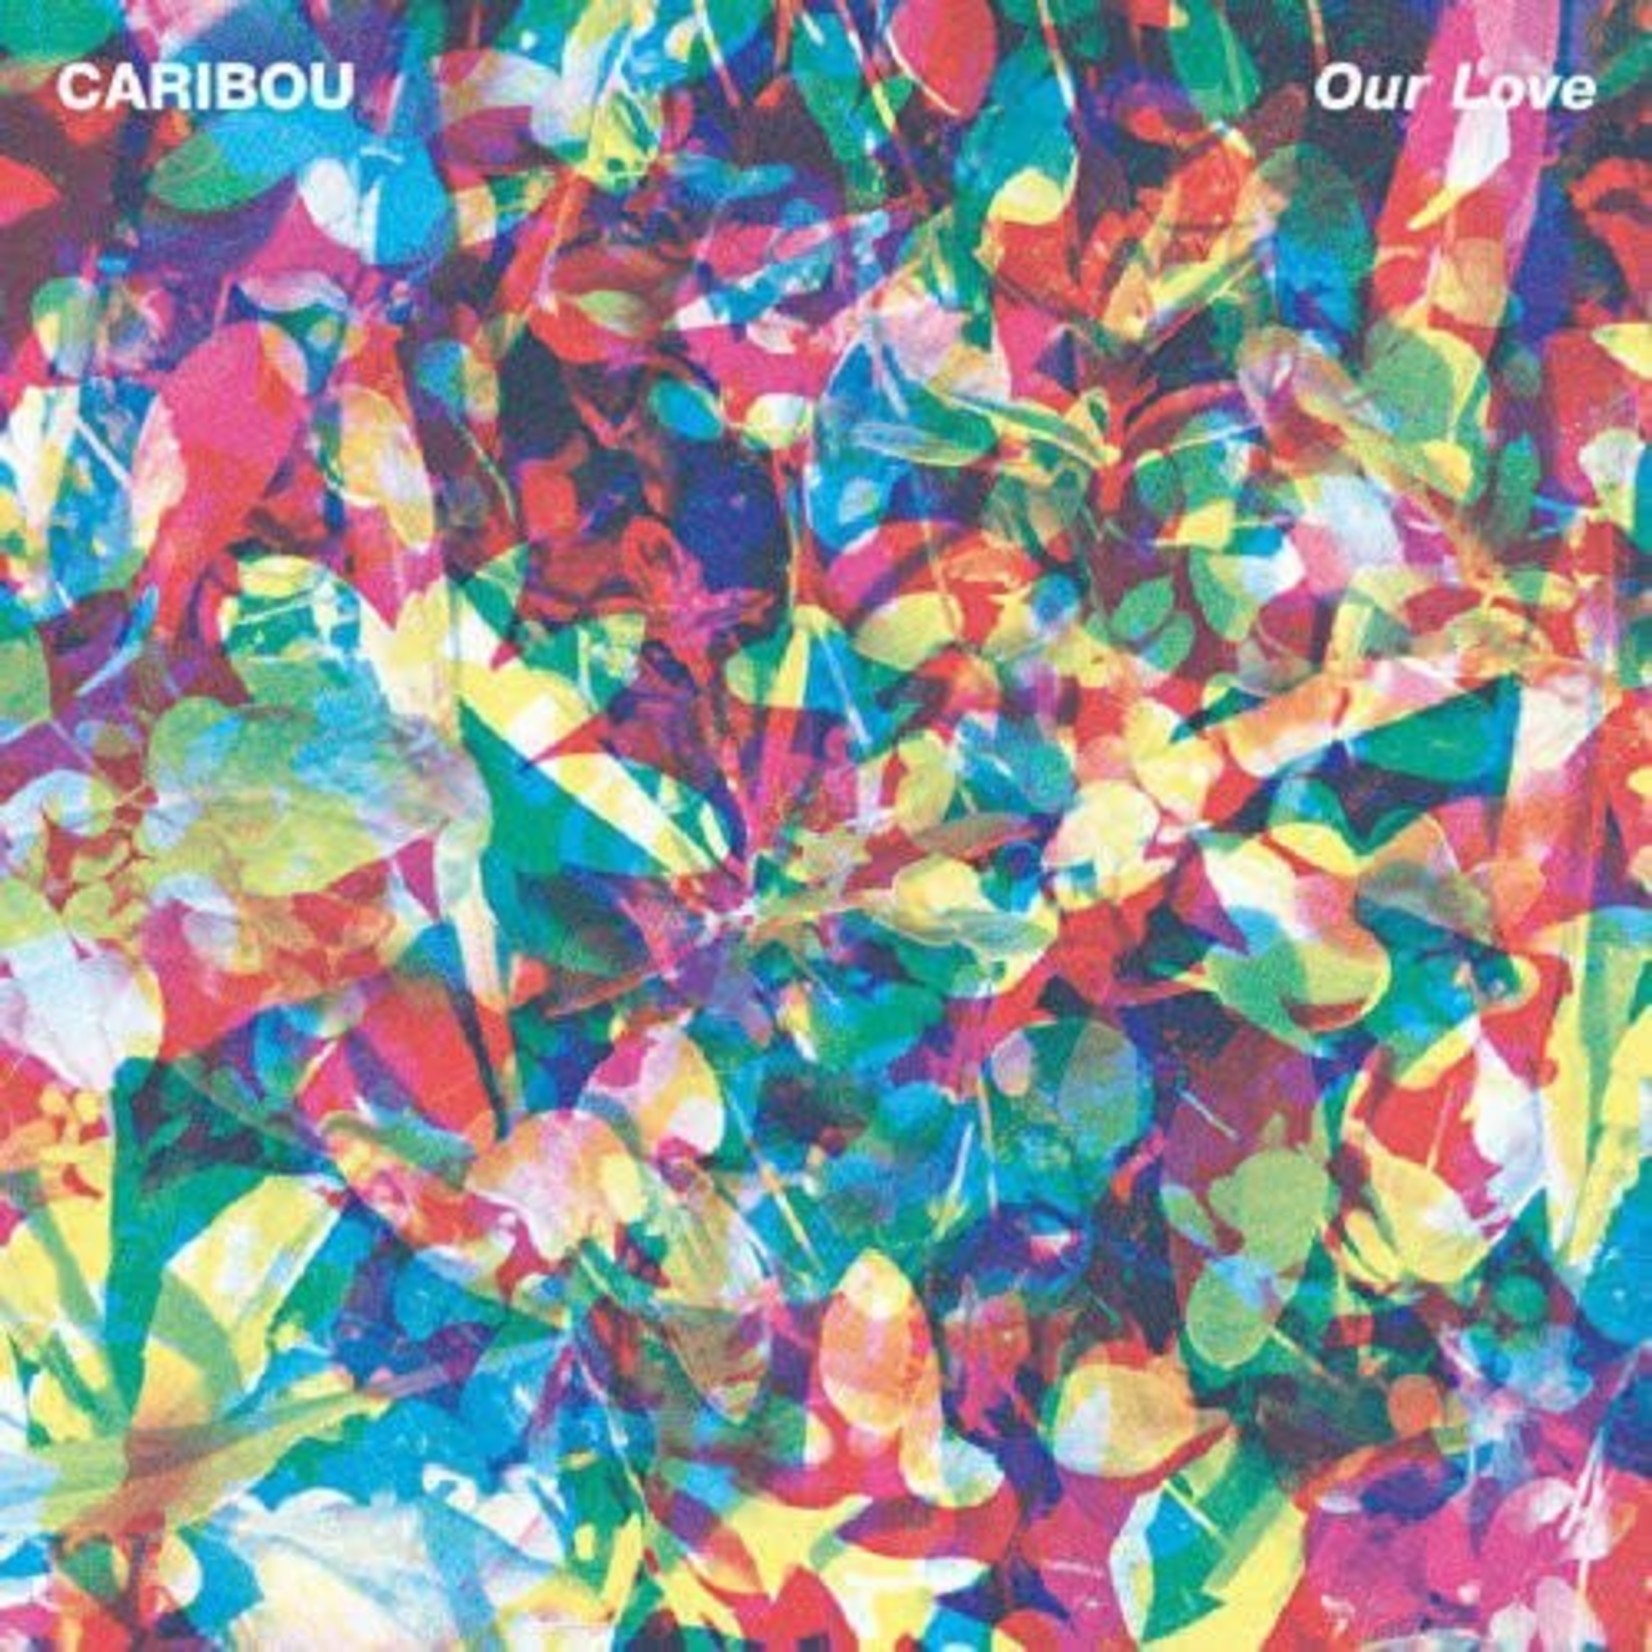 Caribou - Our Love [CD]